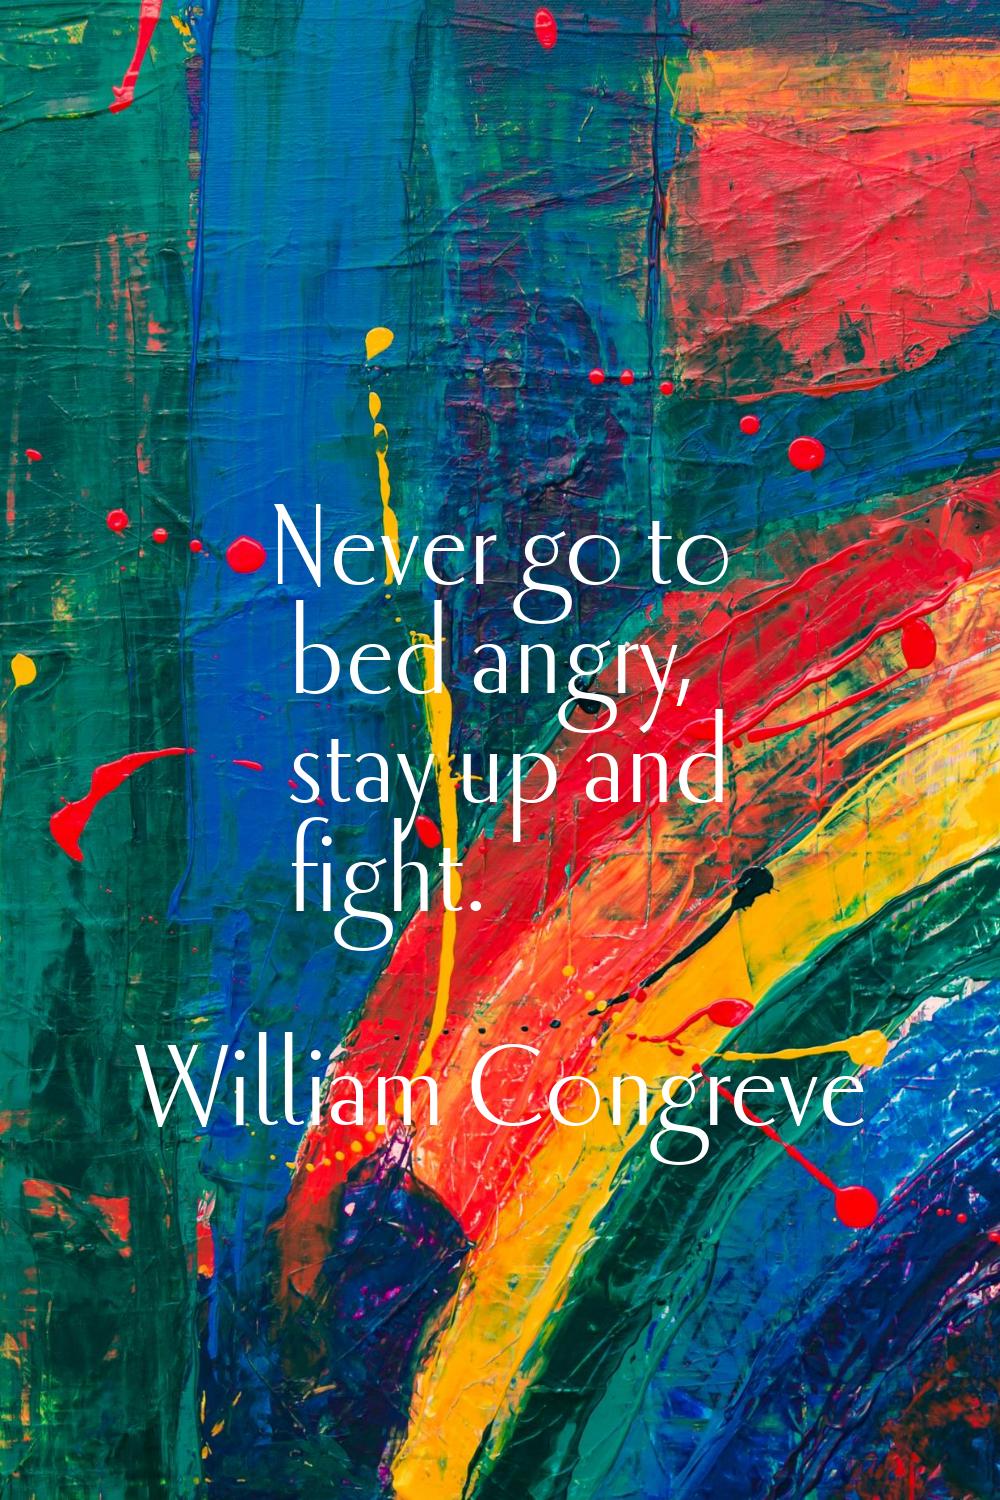 Never go to bed angry, stay up and fight.